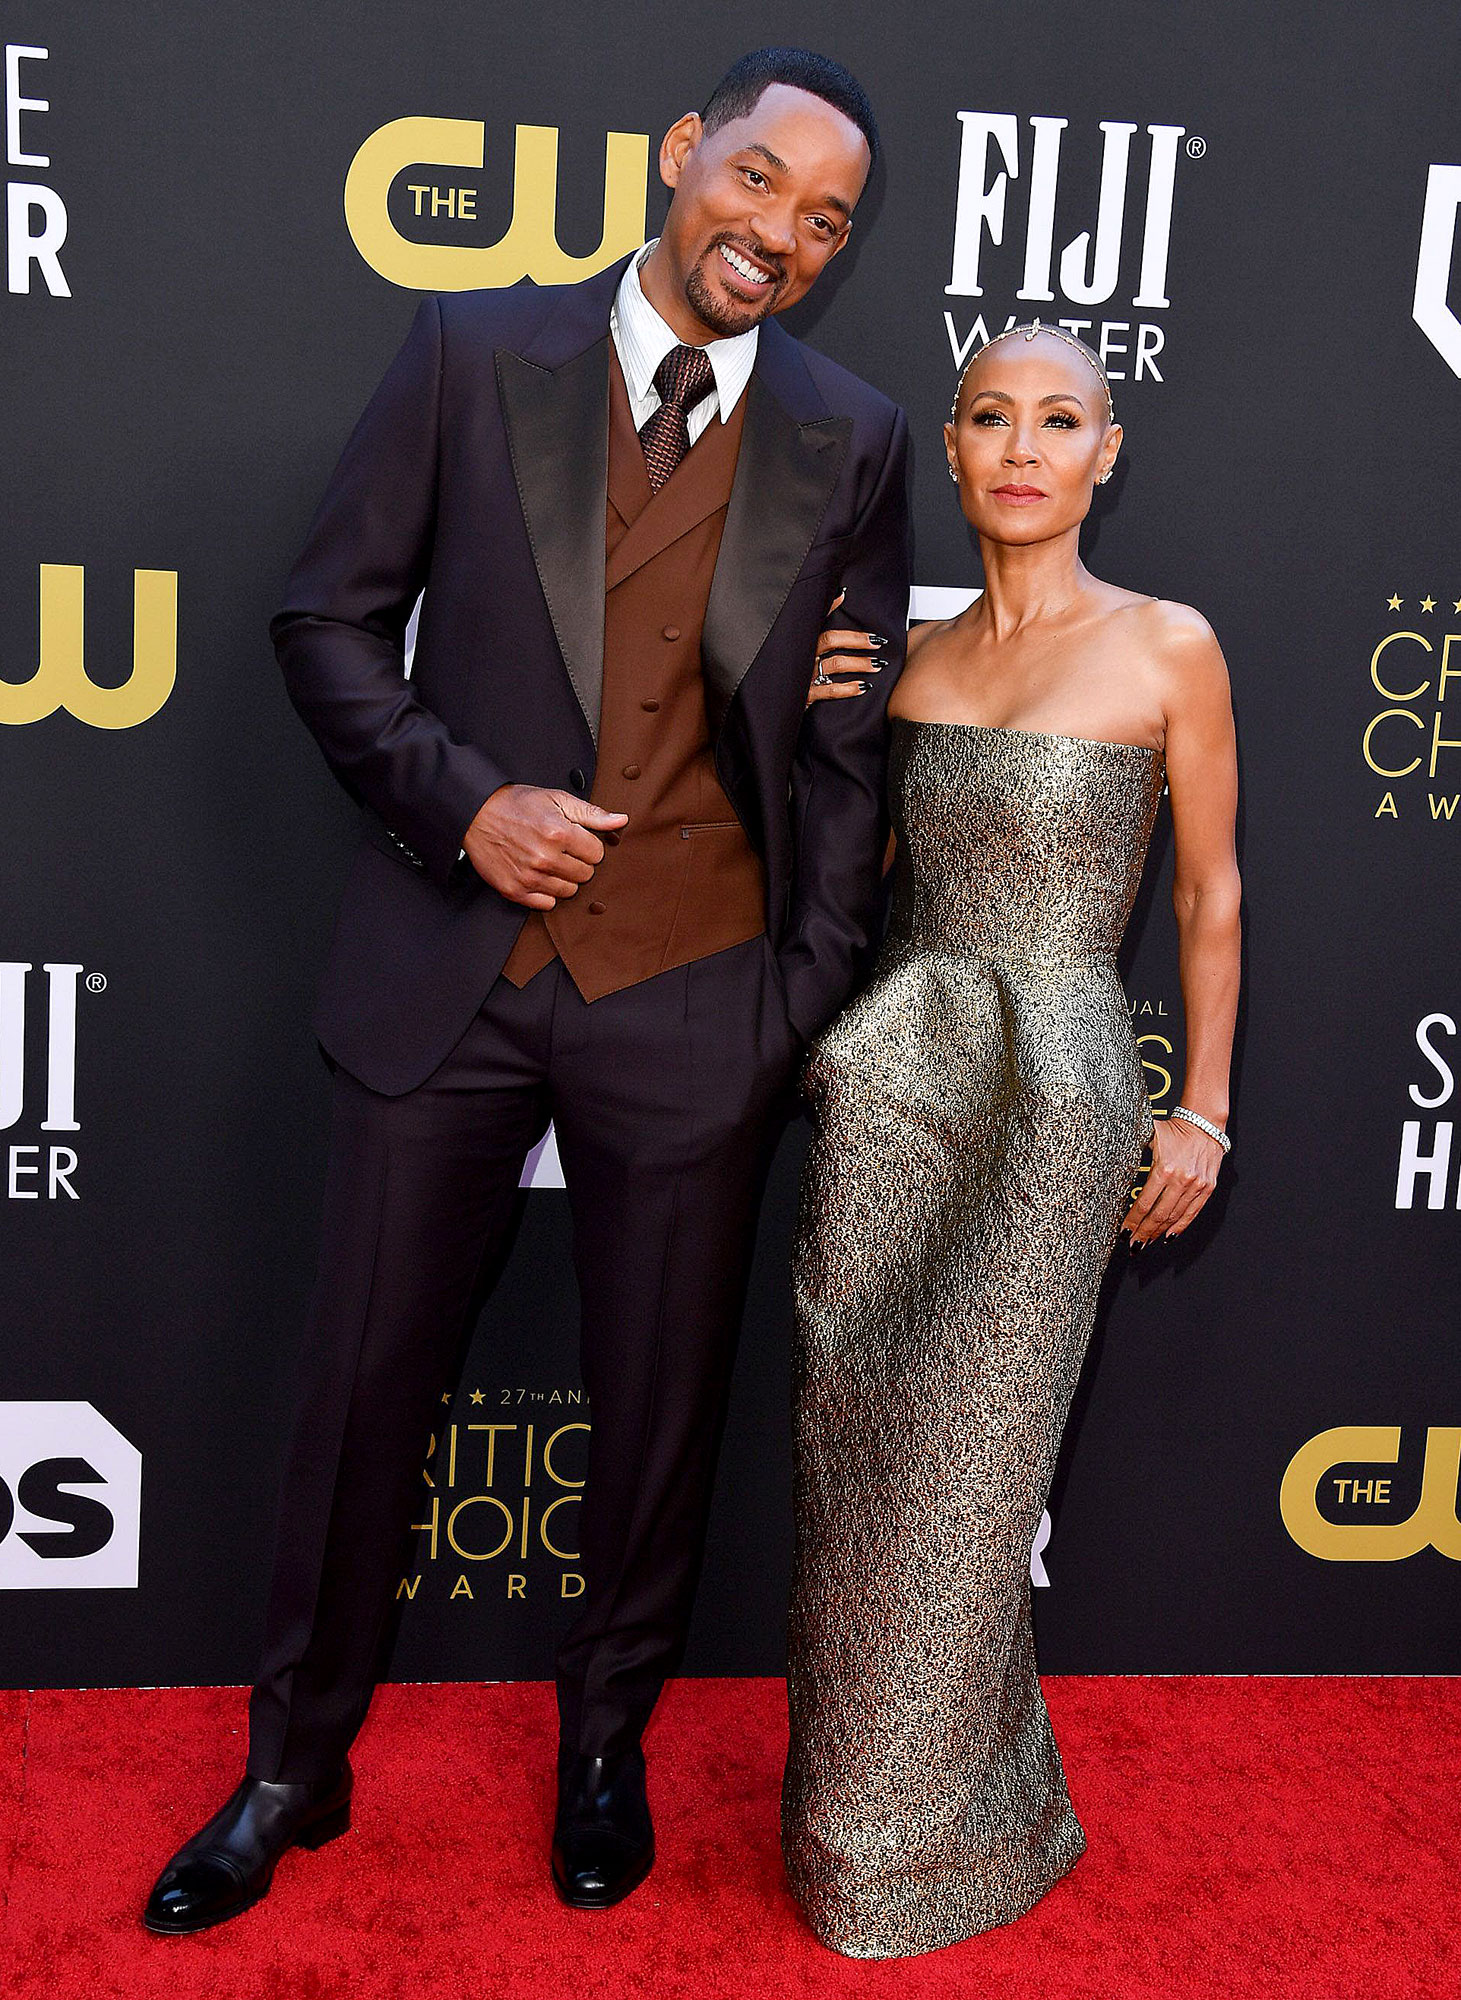 Will Smith and Jada Pinkett Smith Hottest Couples on the Critics Choice Awards 2022 Red Carpet Feature